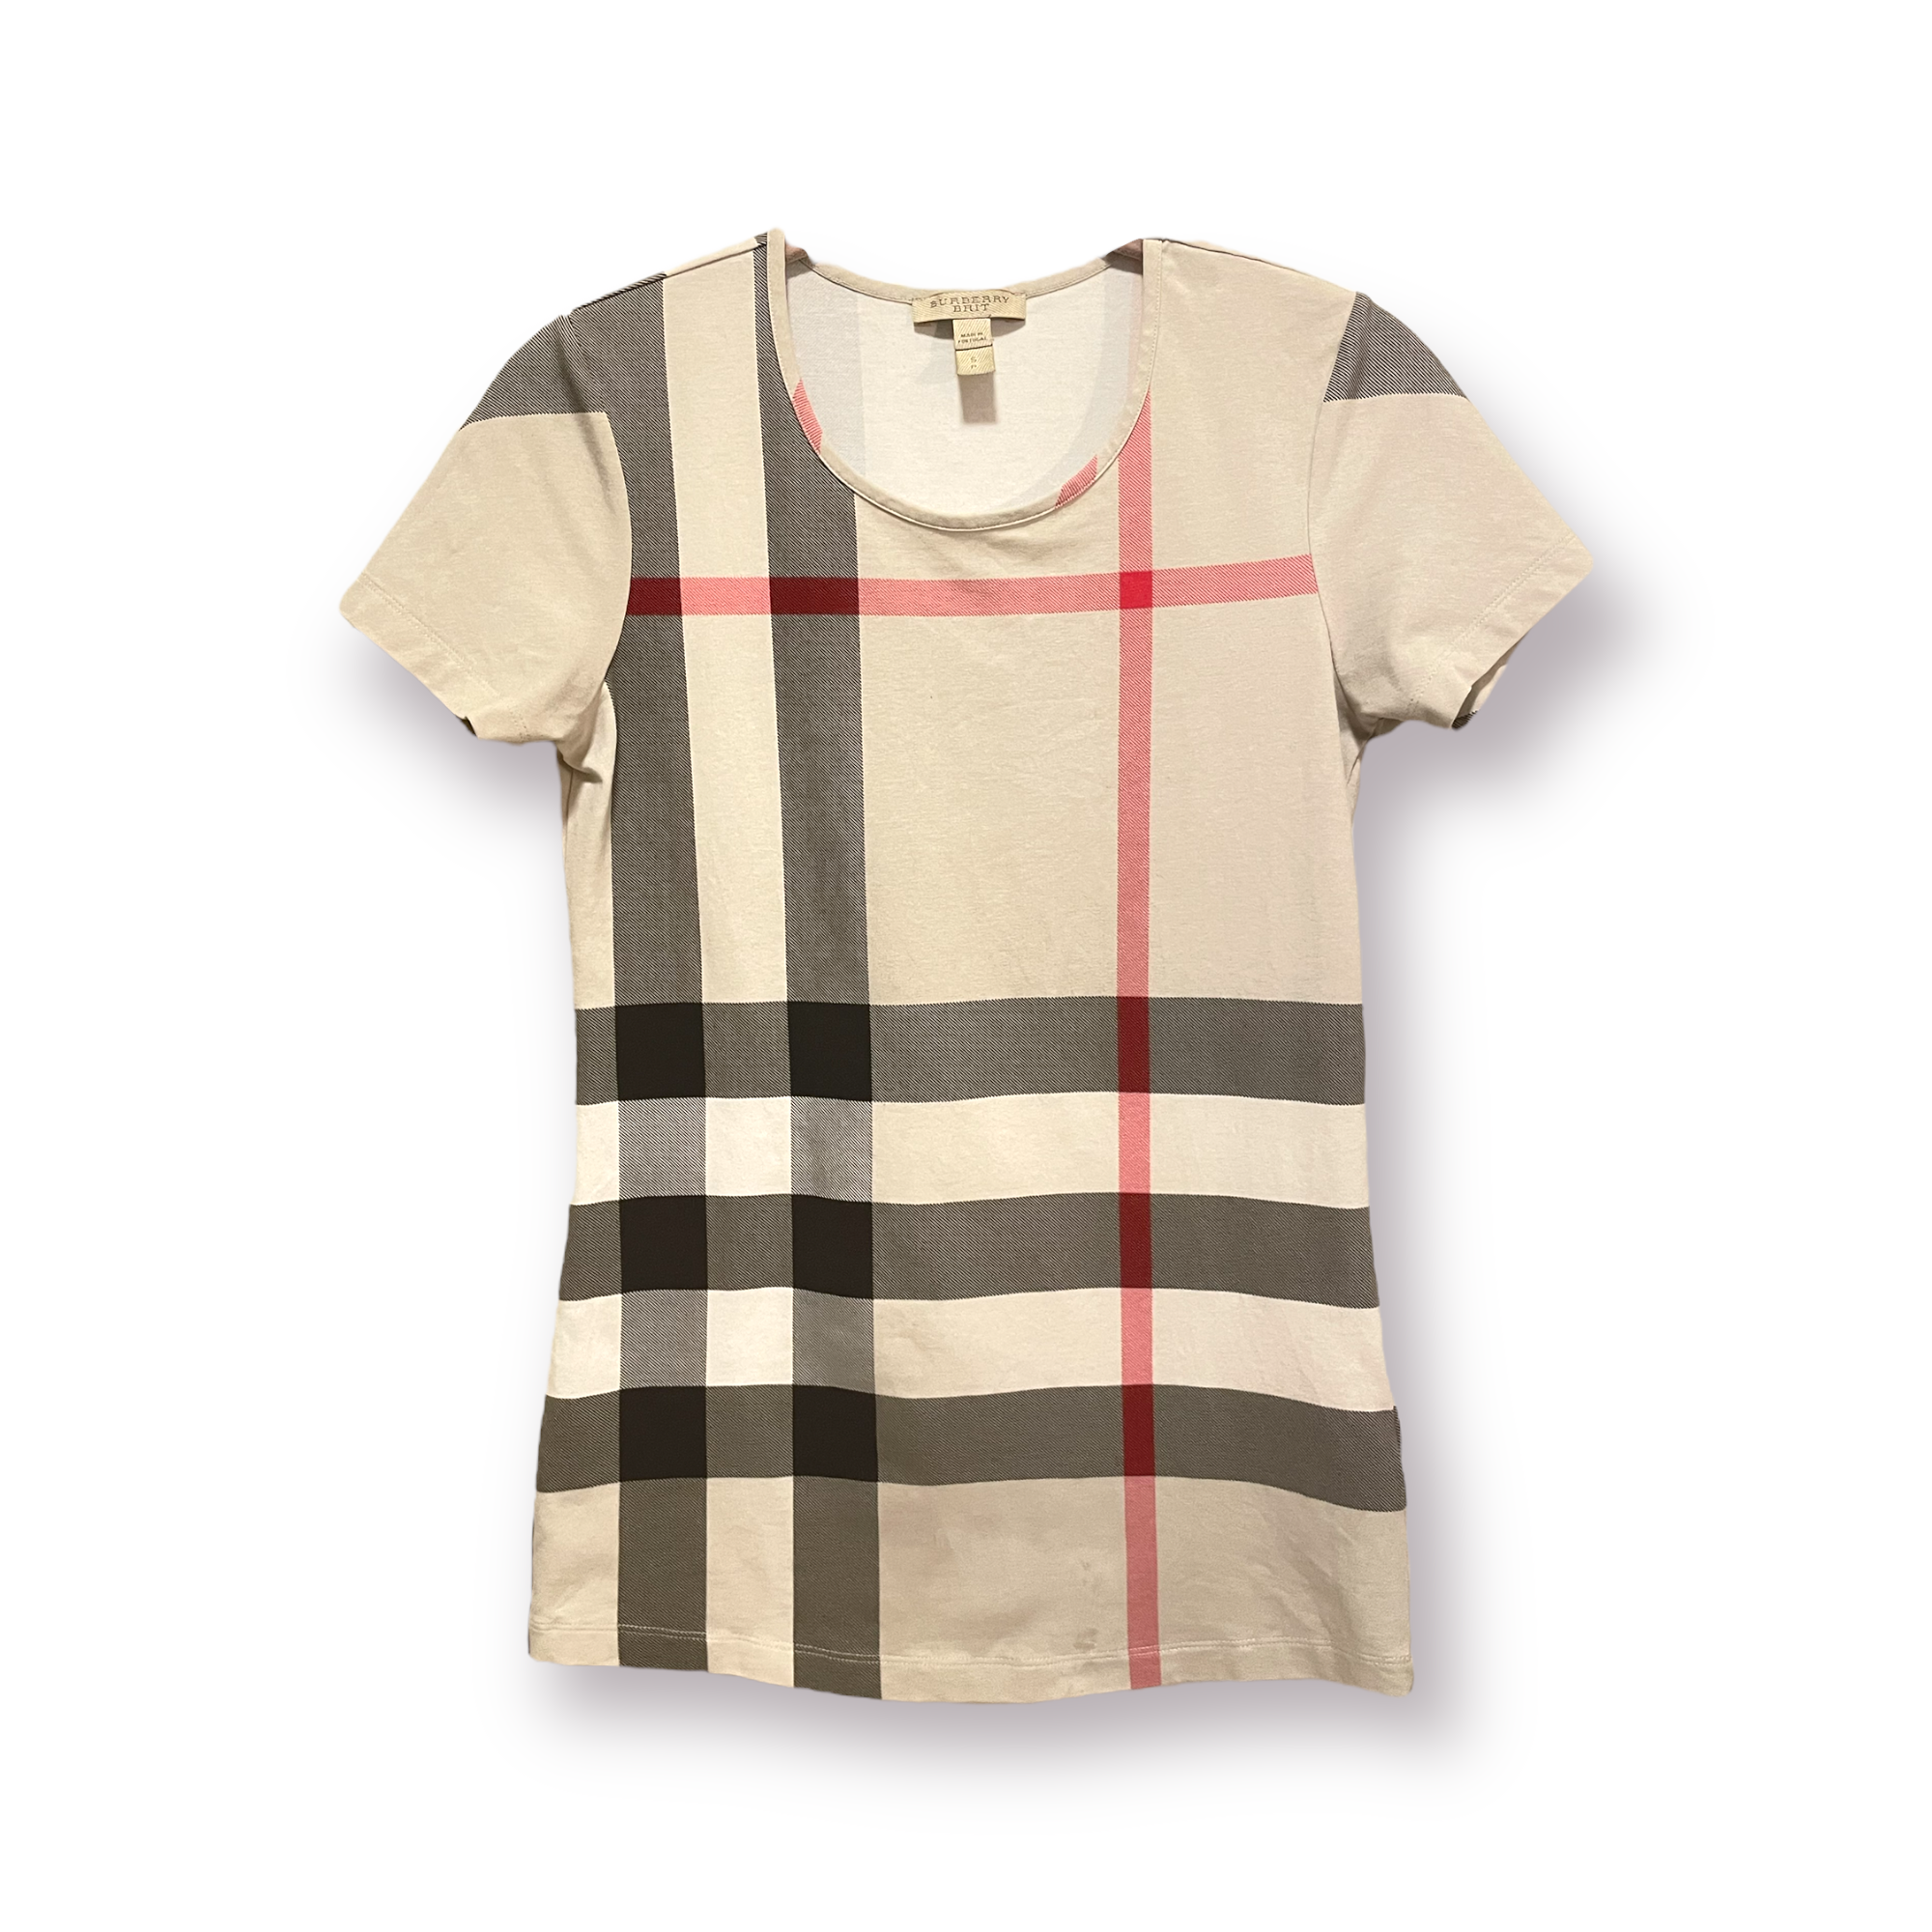 Womens BURBERRY Brit Check Print T-Shirt |Size:Small|